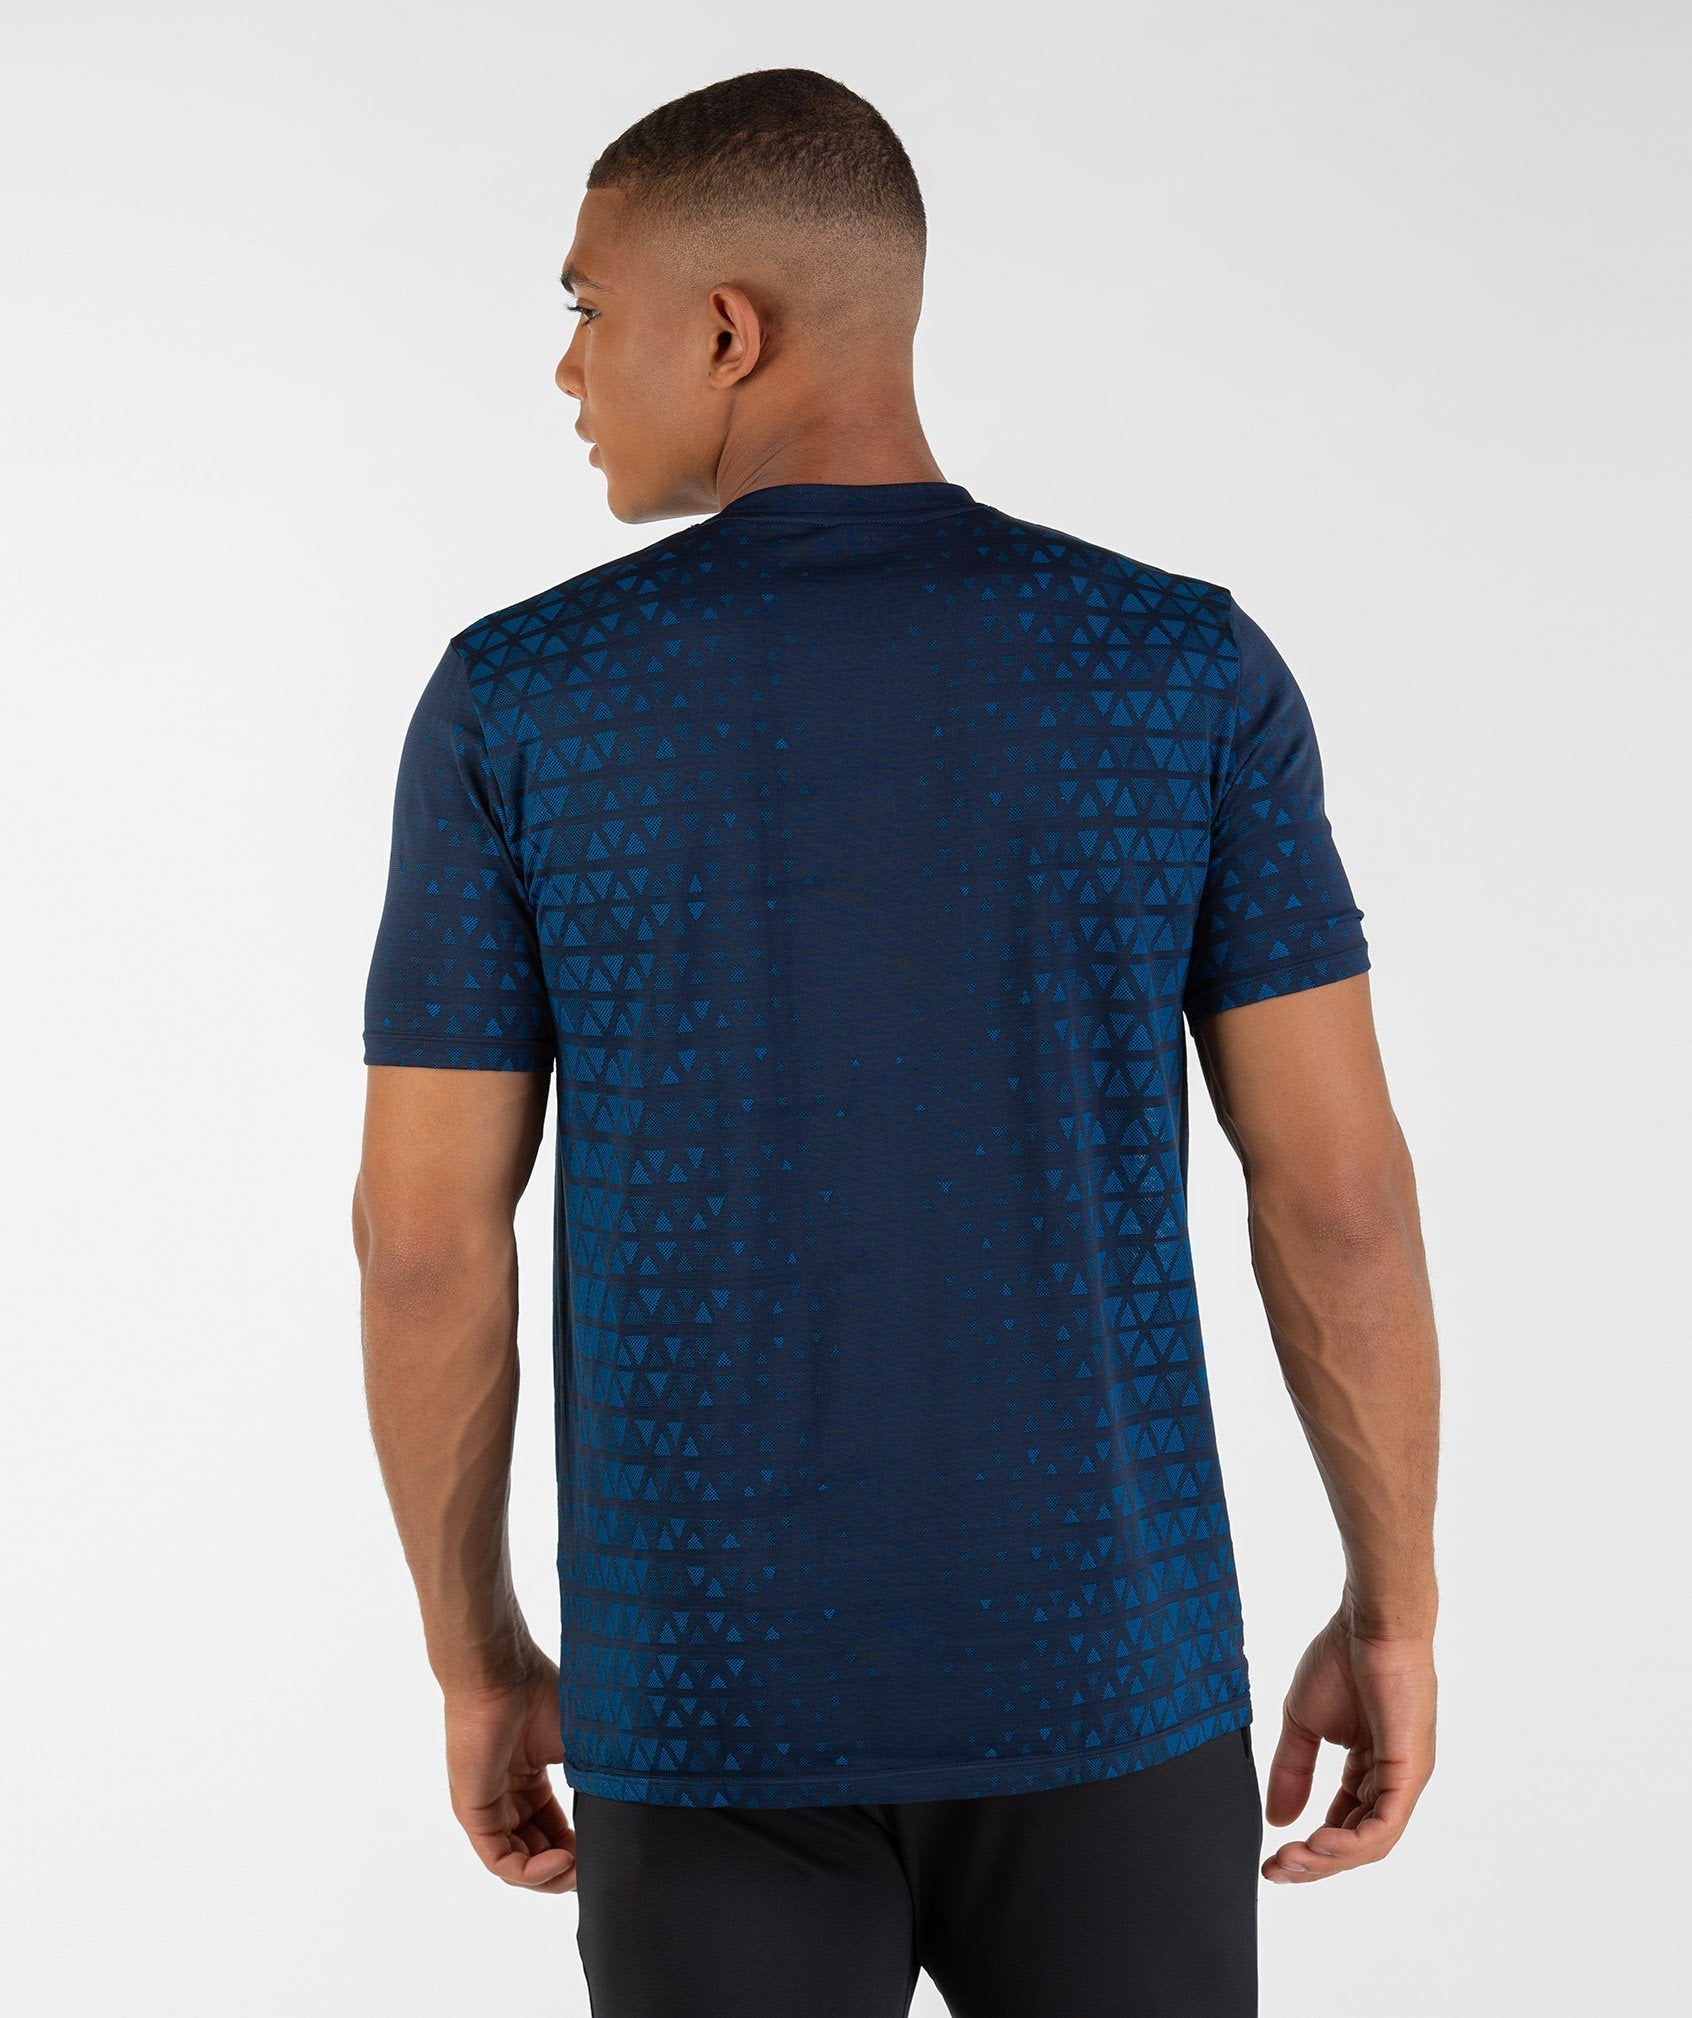 Fade T-Shirt in Sapphire Blue - view 2